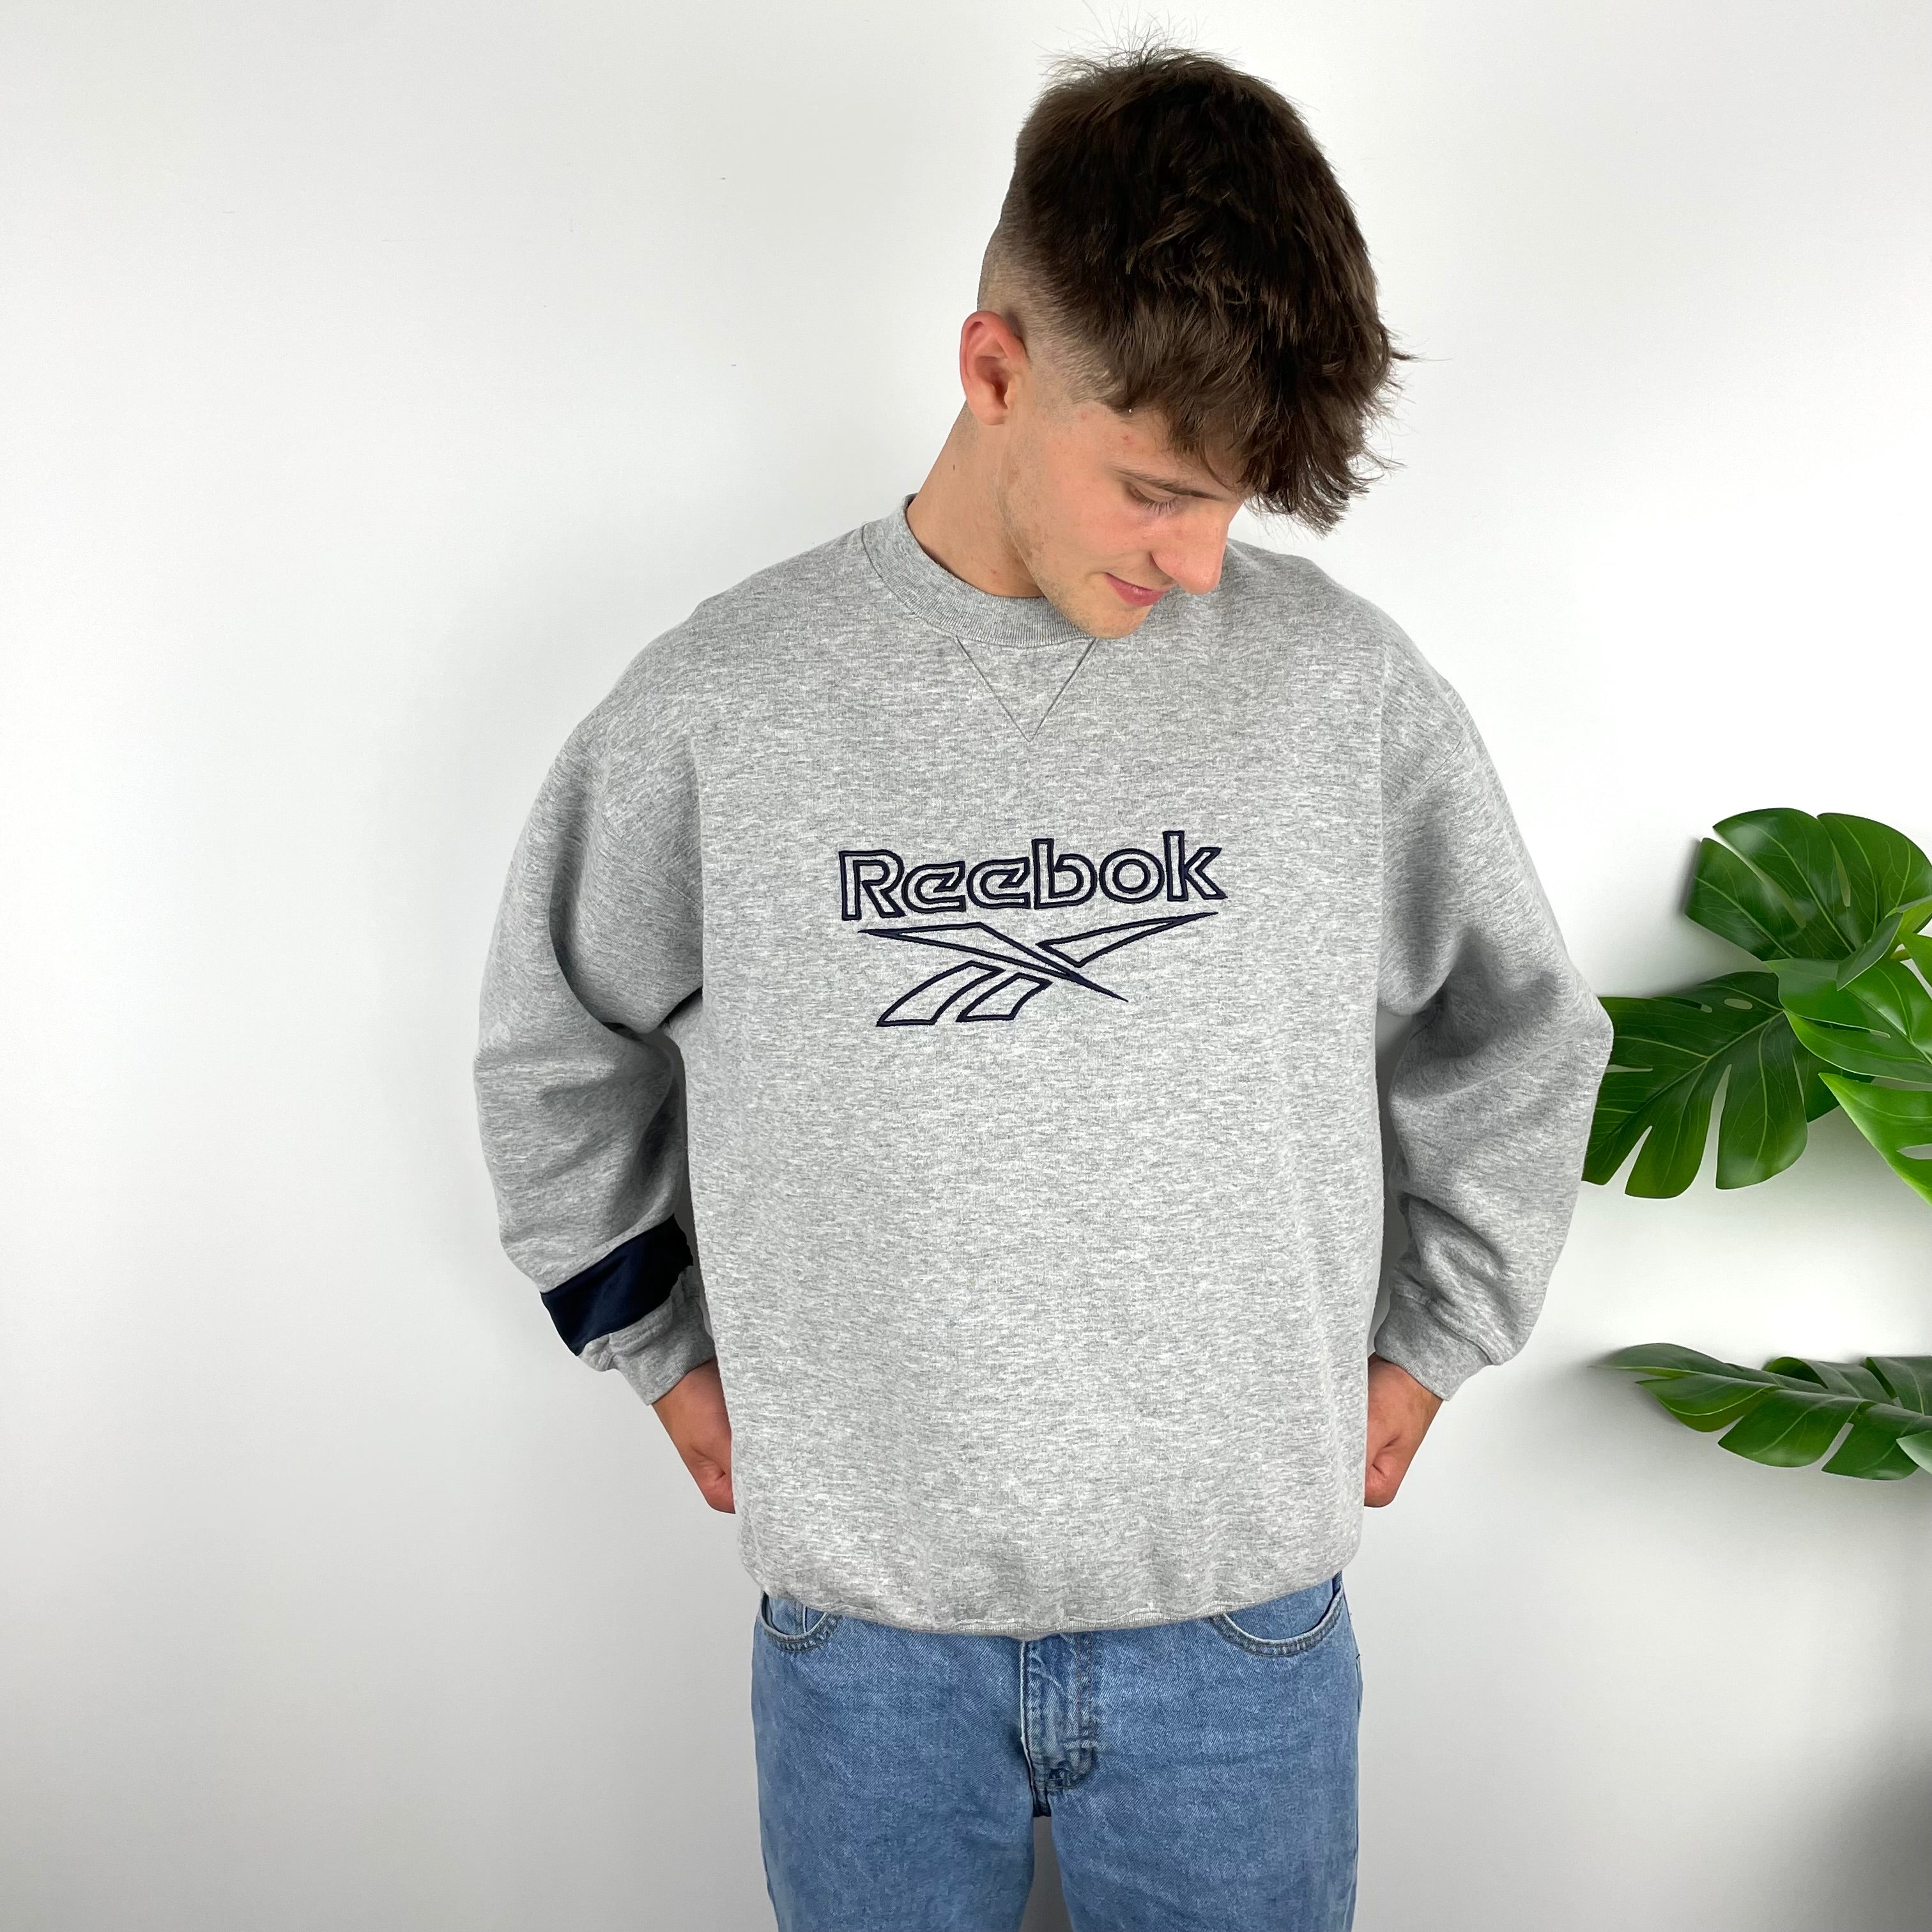 Reebok RARE Grey Embroidered Spell Out Sweatshirt (L)